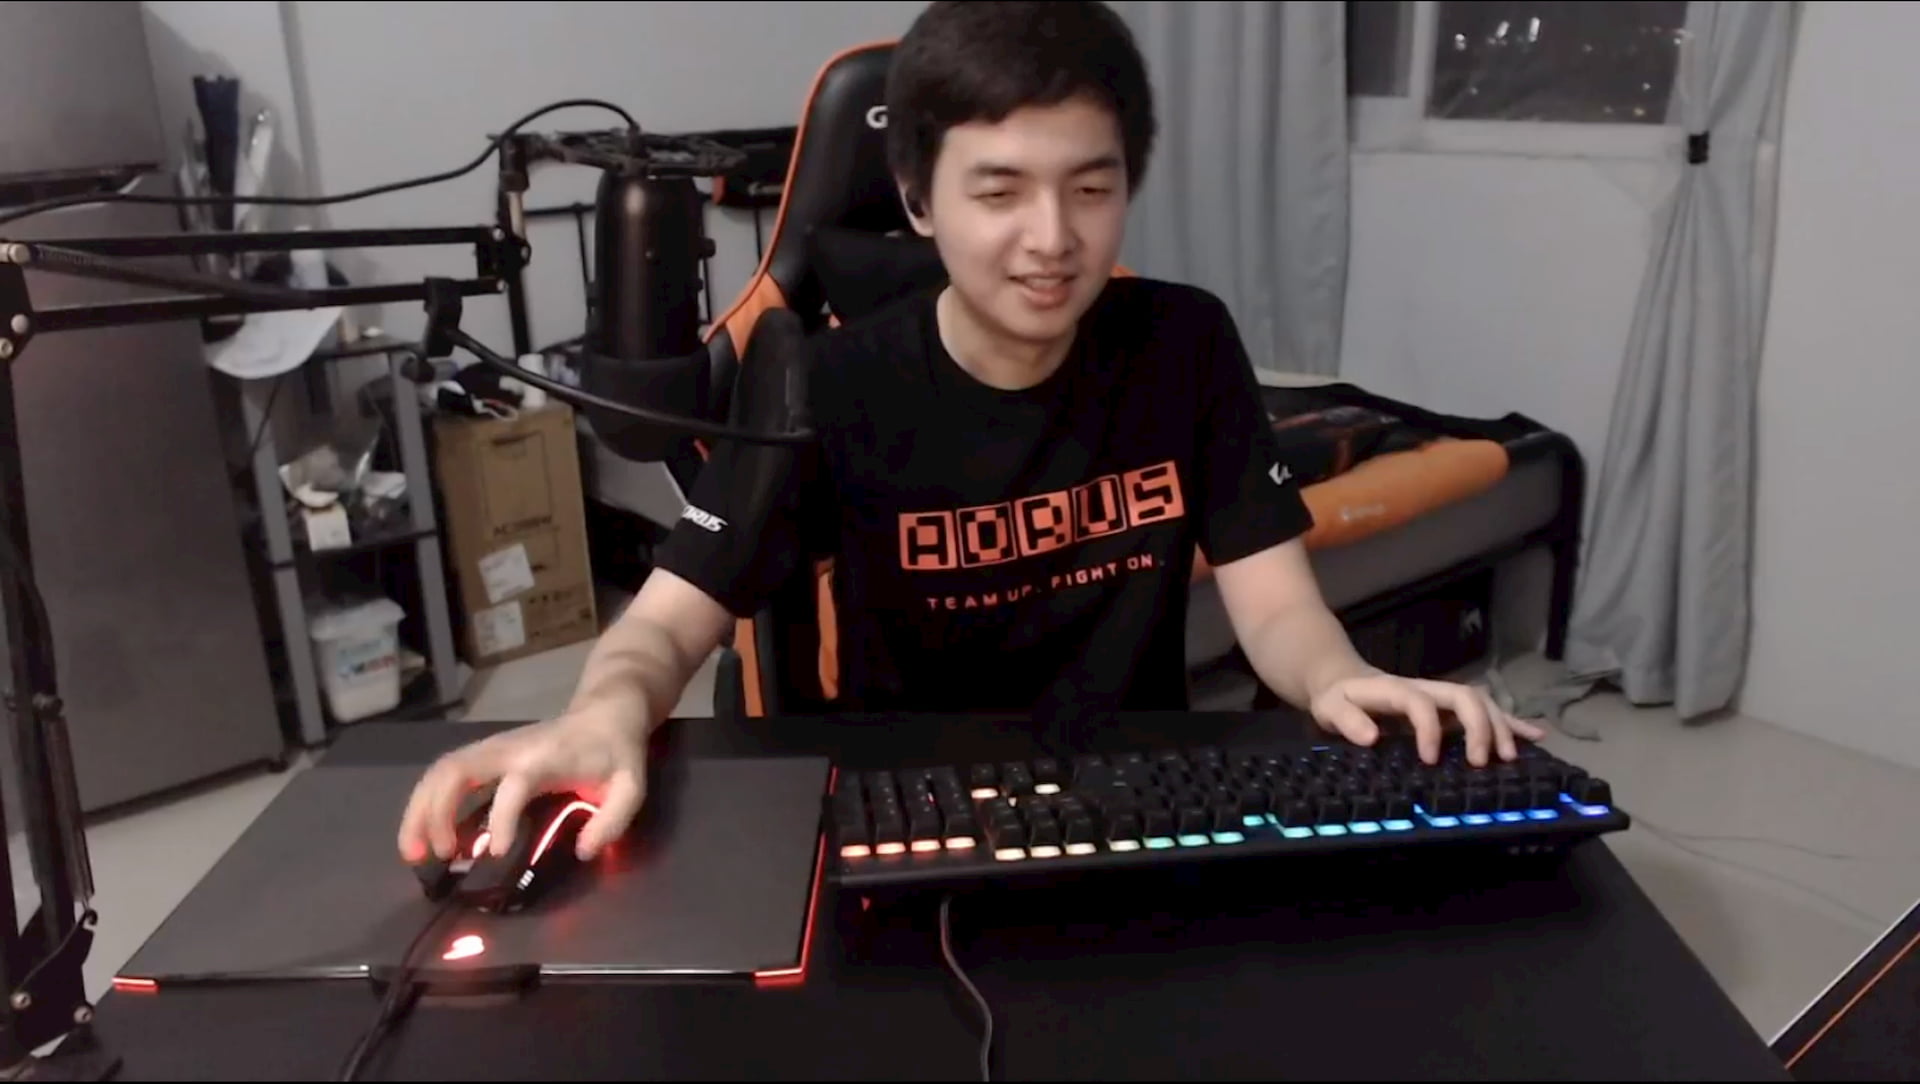 [Member Submission] Unboxing and Review of AORUS K1 Keyboard